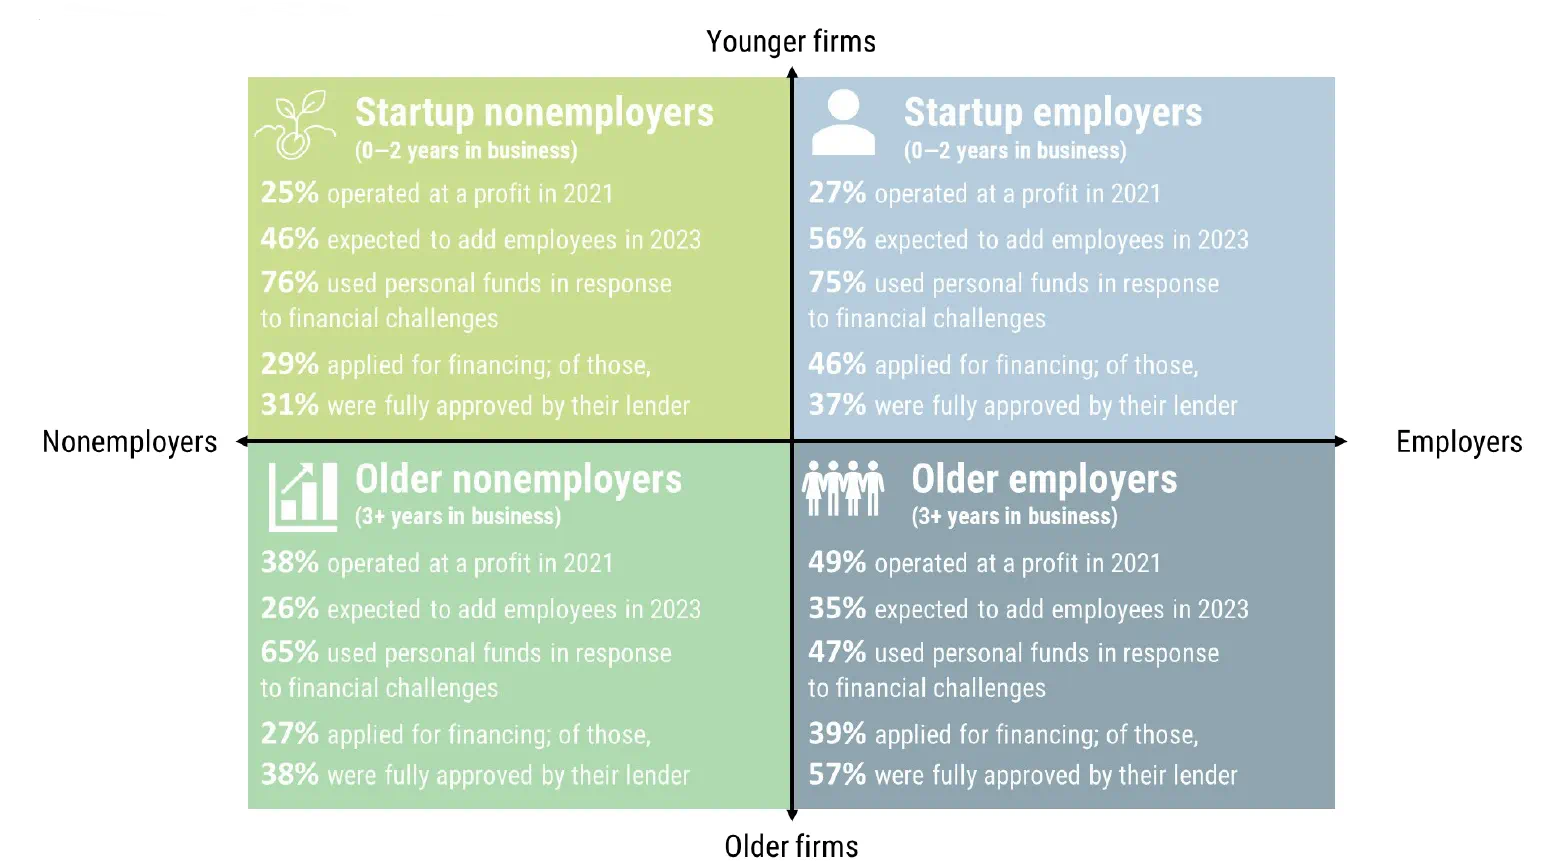 A magic quadrant drawing the comparison between age of firm vs employer types